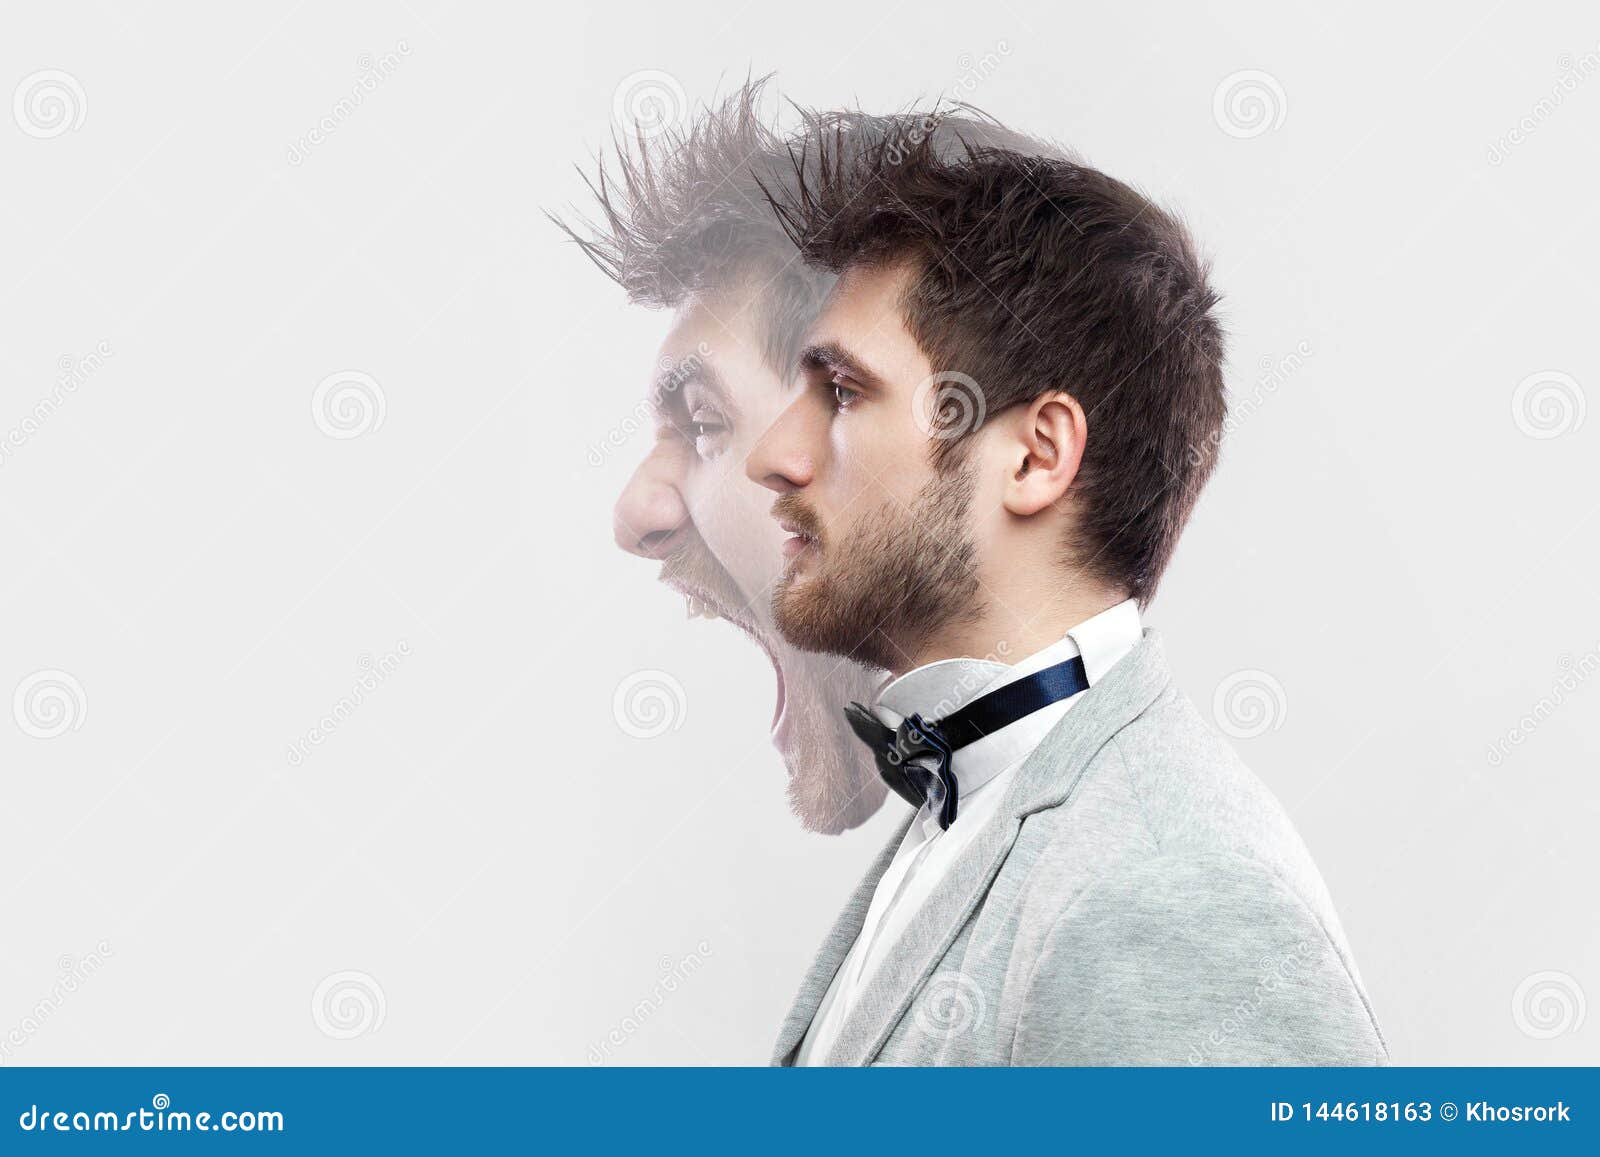 profile side view portrait of two faced young man in calm serious and angry screaming expression. different emotion inside and